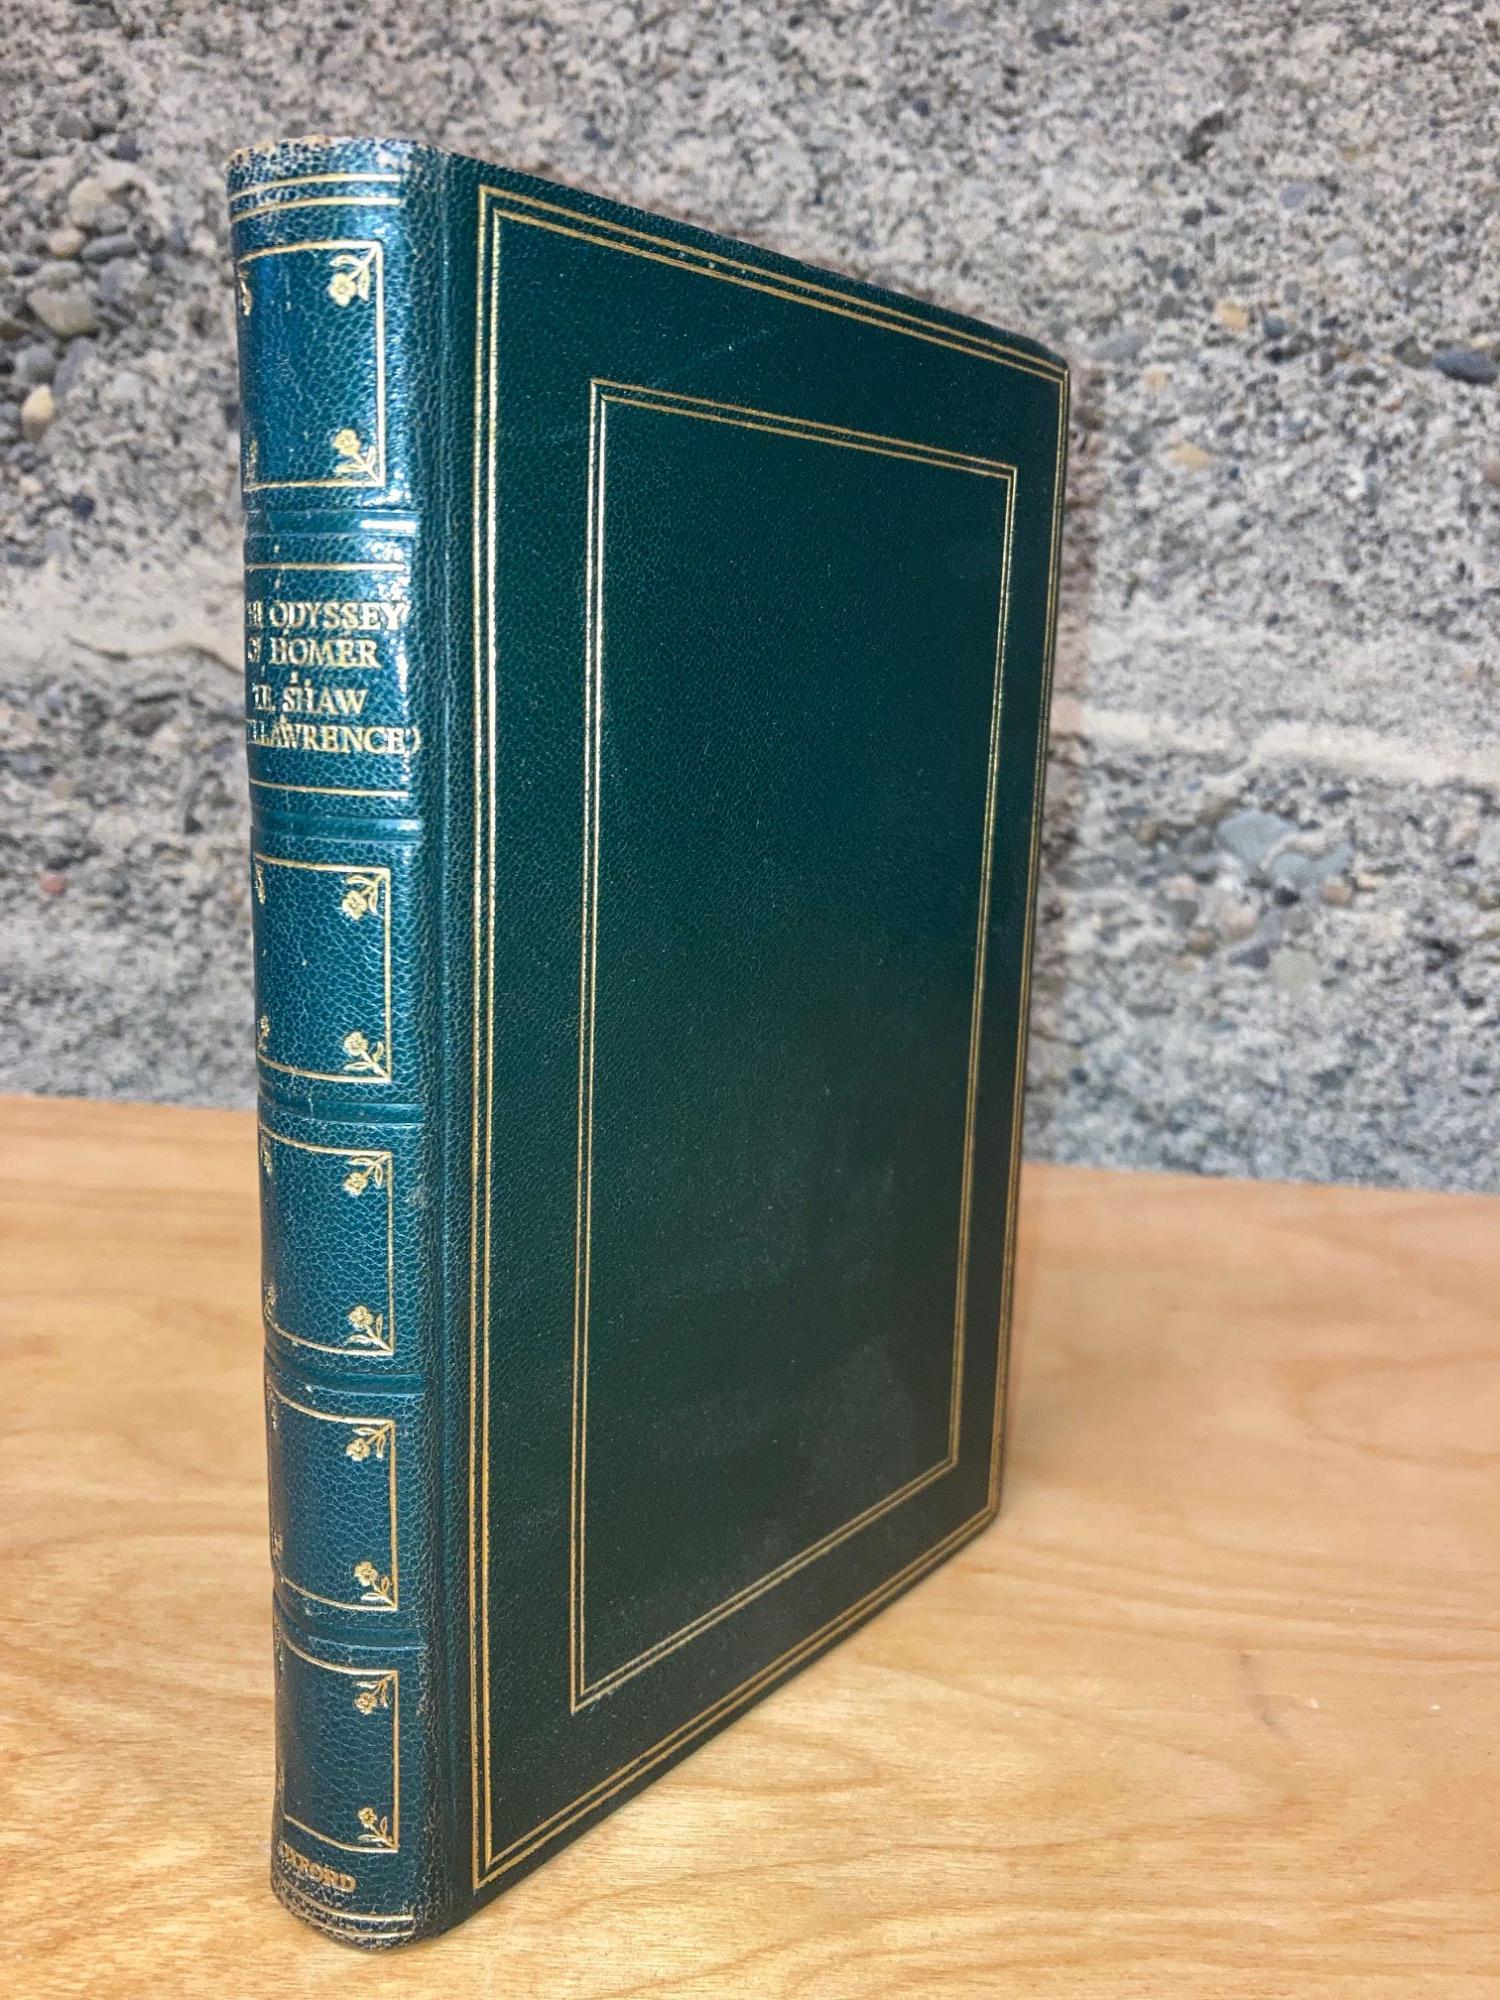 The Odyssey of Homer. Translated by T.E. Shaw (Colonel T.E. Lawrence) - Homer, Lawrence, T.E. (translator); [Shaw, T.E. pseudonym]